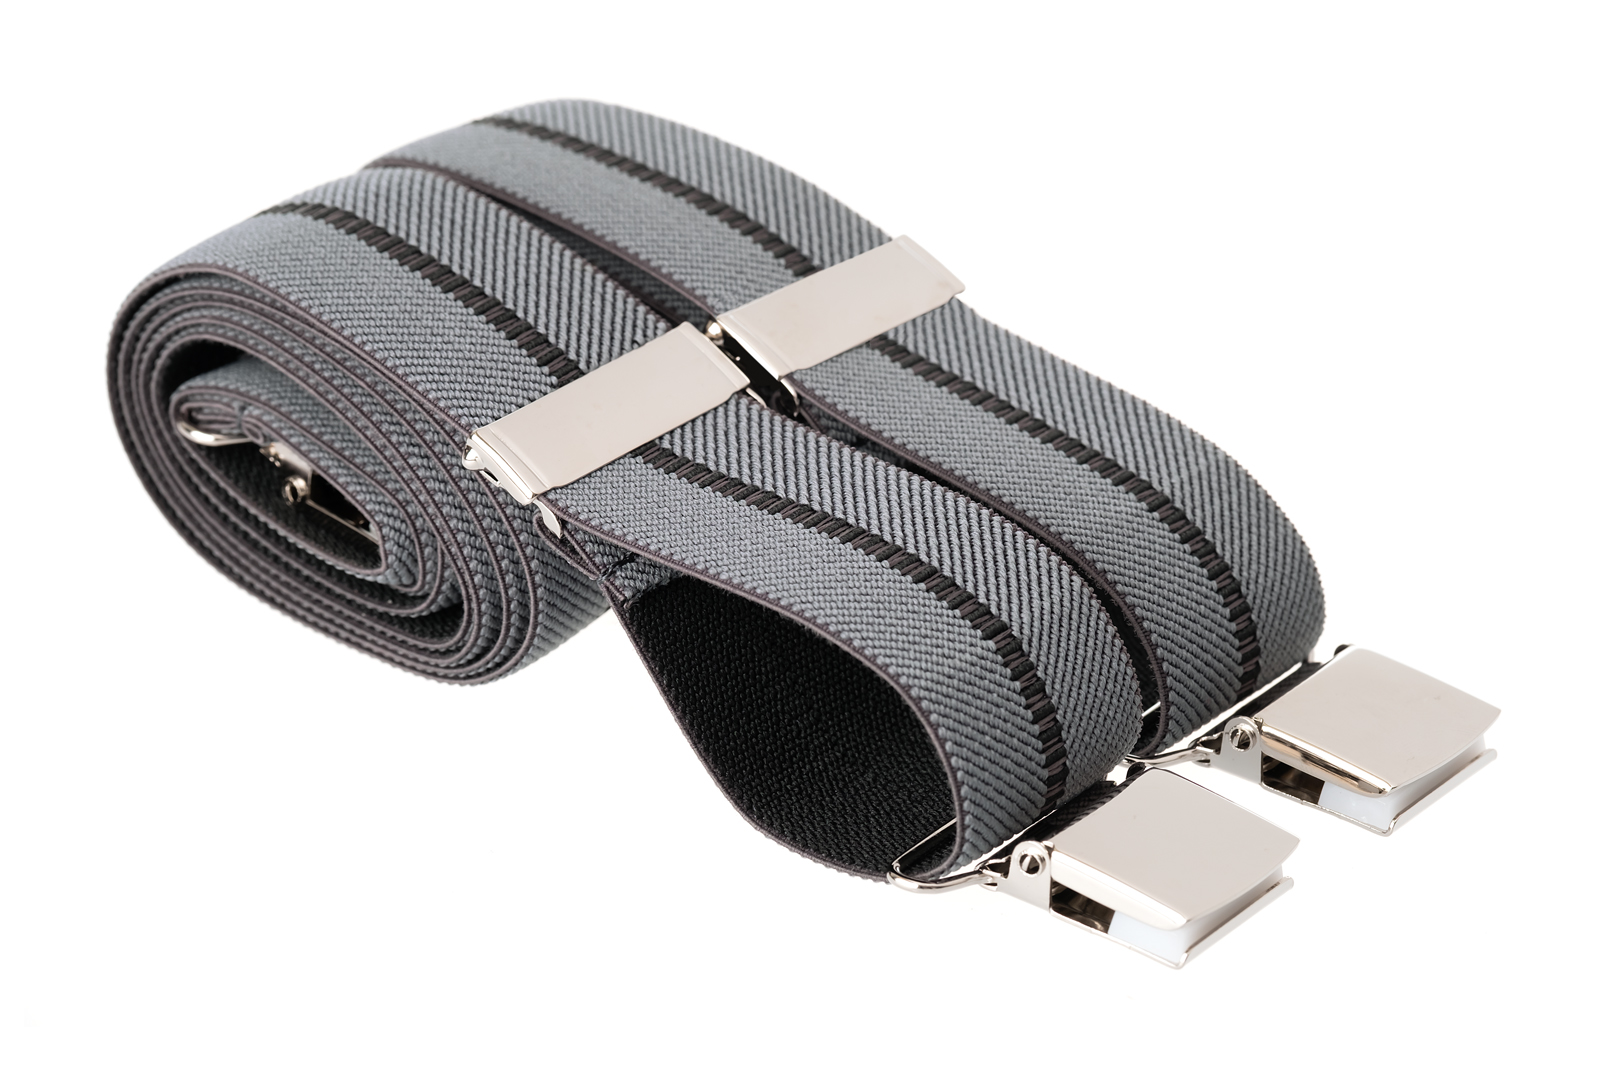 British made silver grey trouser braces with strong silver coloured large clips. These grey braces are made from strong stretchable 35mm wide elastic with a herringbone style design and a subtle central thin stripe by Mandittions